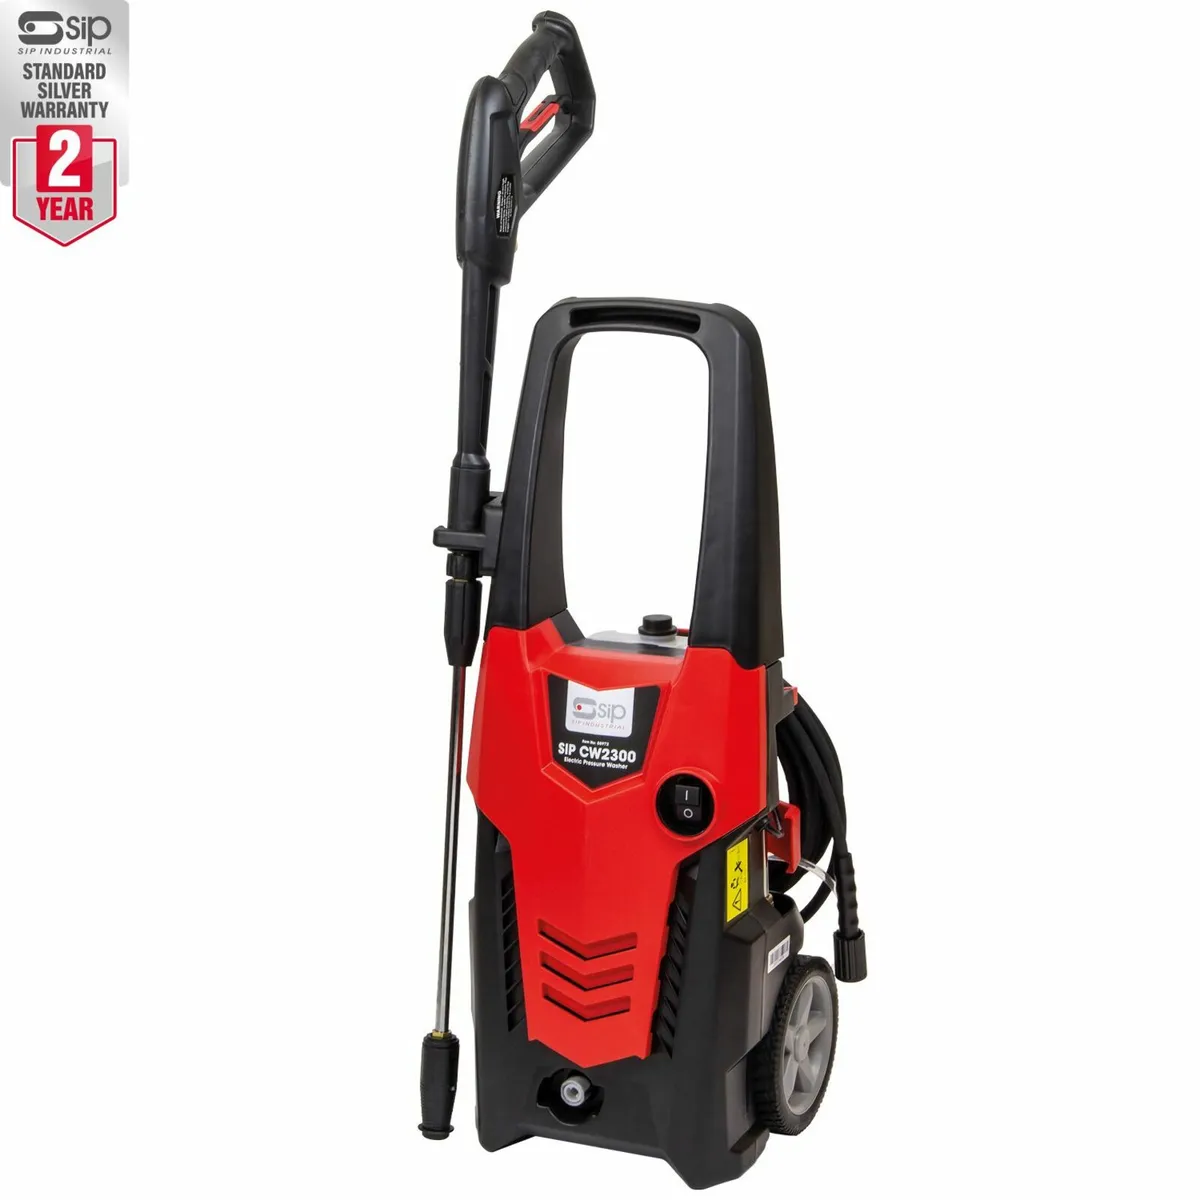 SIP CW2300 Electric Pressure Washer (2900psi)